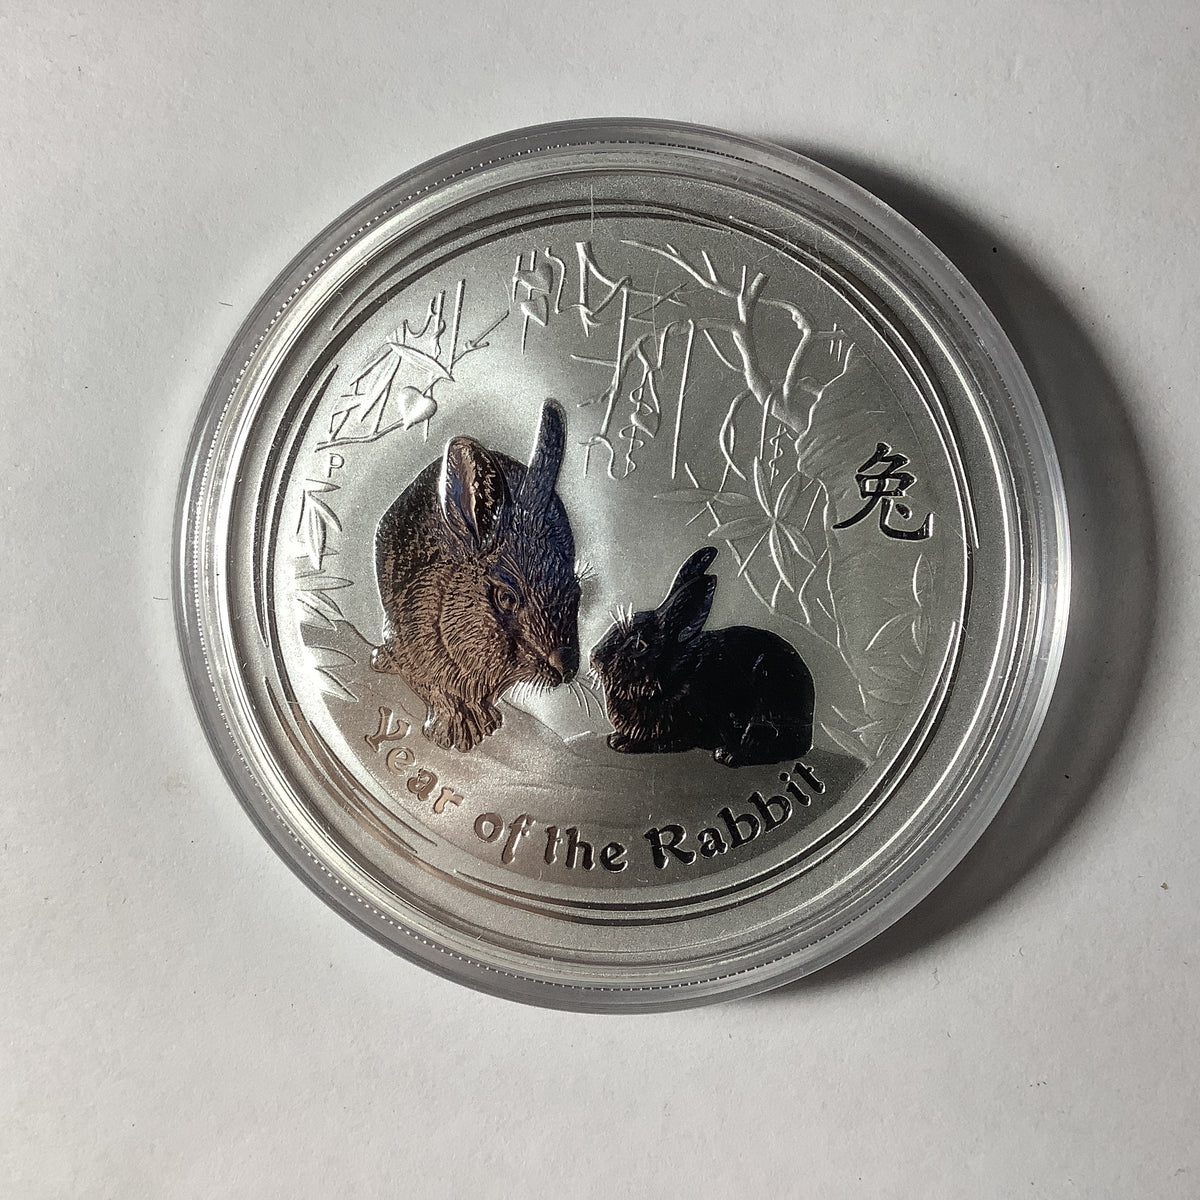 2011 Year of the Rabbit 2 ounce silver coin in capsule.